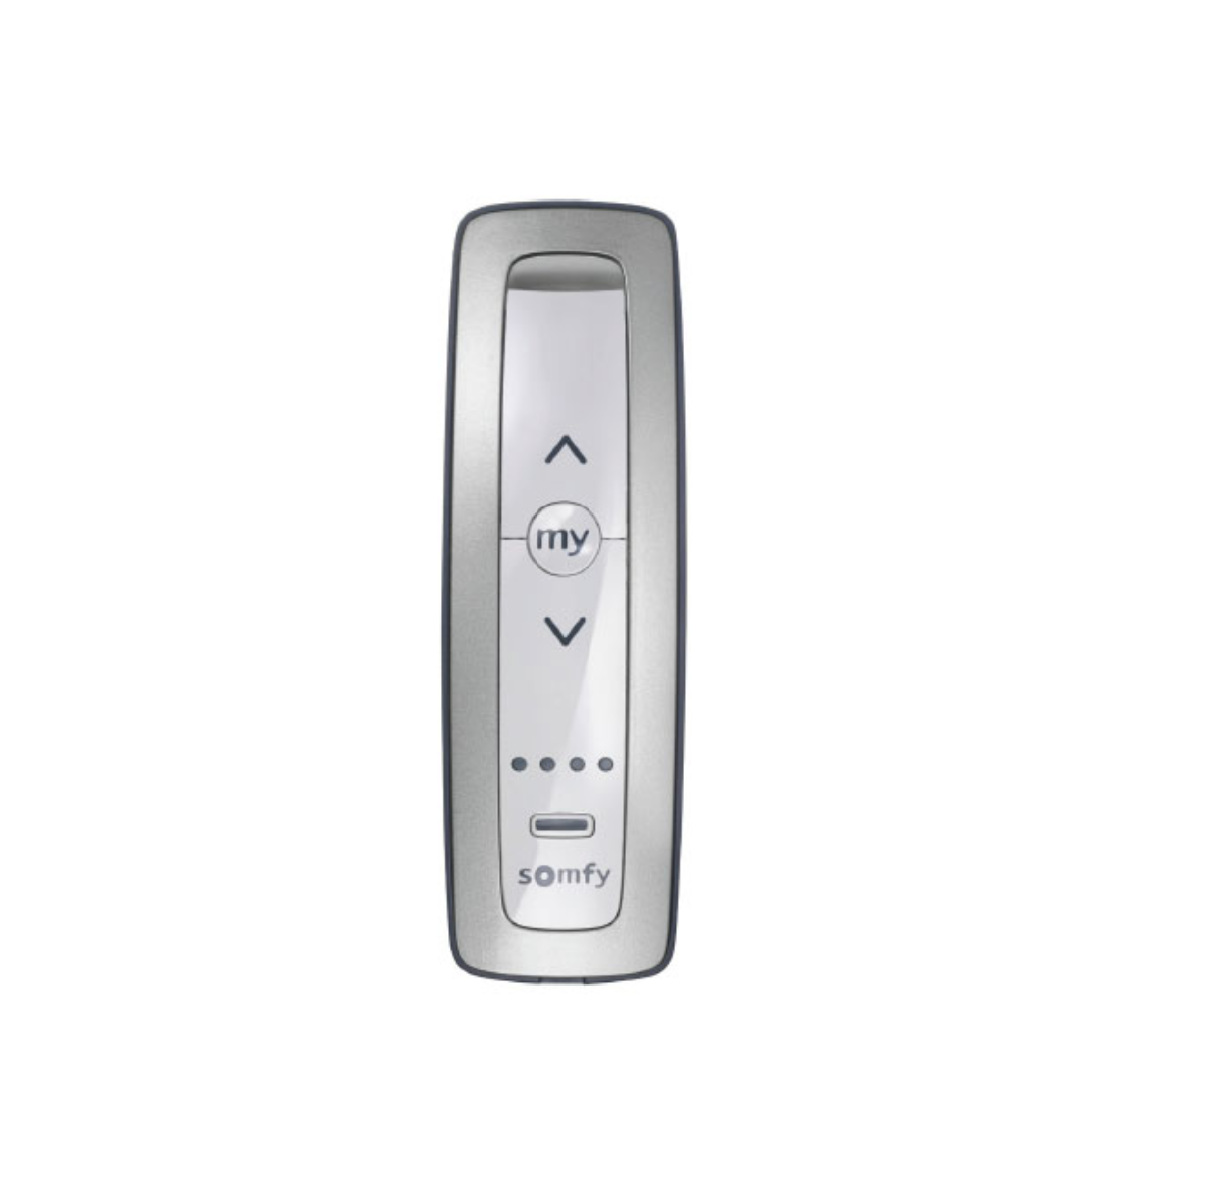 Somfy Remote Control Somfy Telecommande for Automatic Gate and Garage Door  - China Somfy Remote Control, Somfy Telecommande